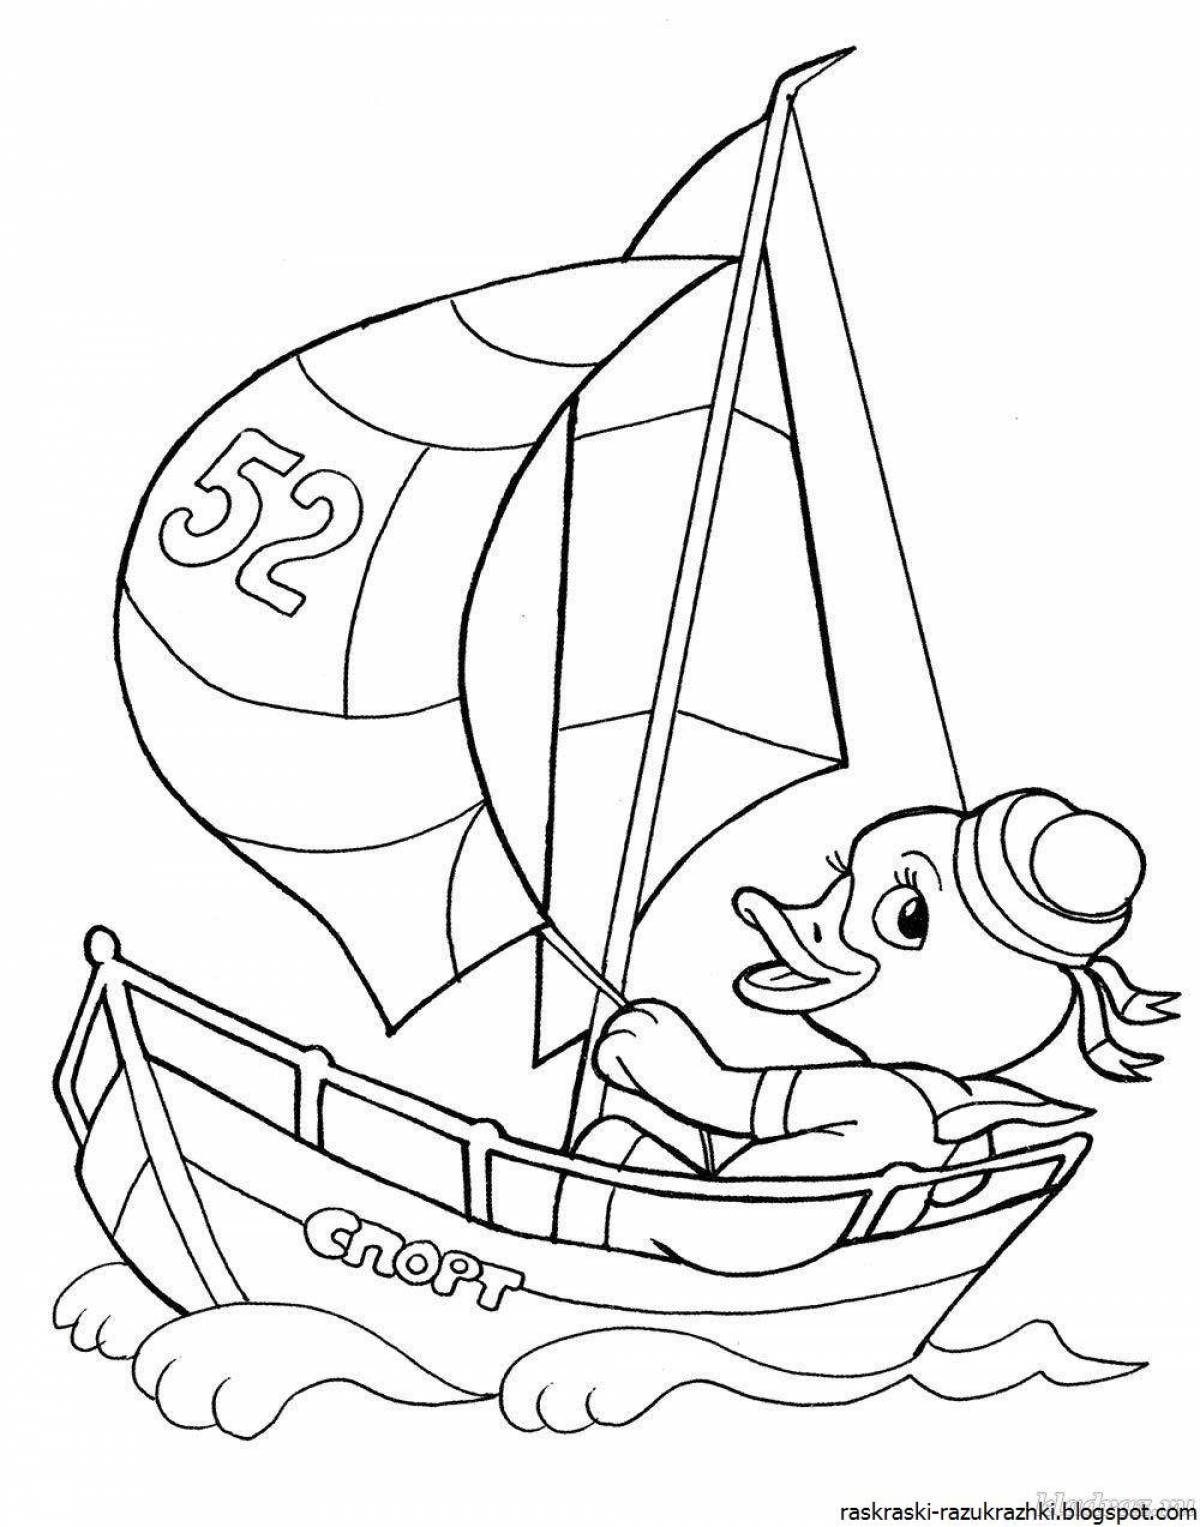 Fun coloring for boys 5-7 years old